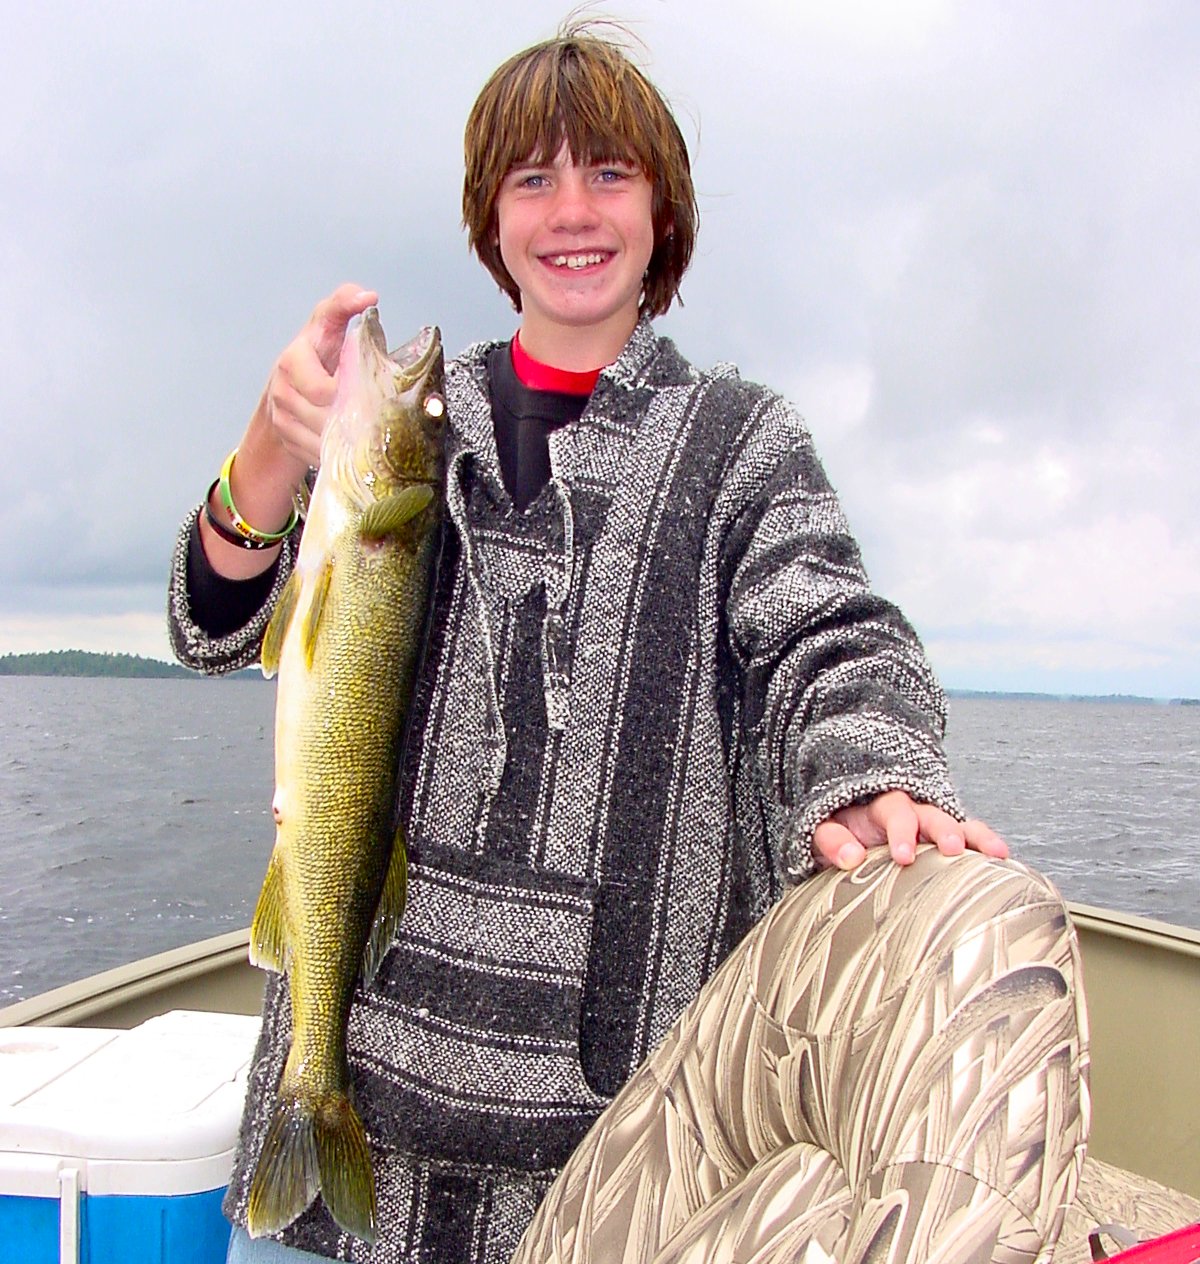 Walleye fishing Q&A: Live vs. preserved minnows, jigging depth and